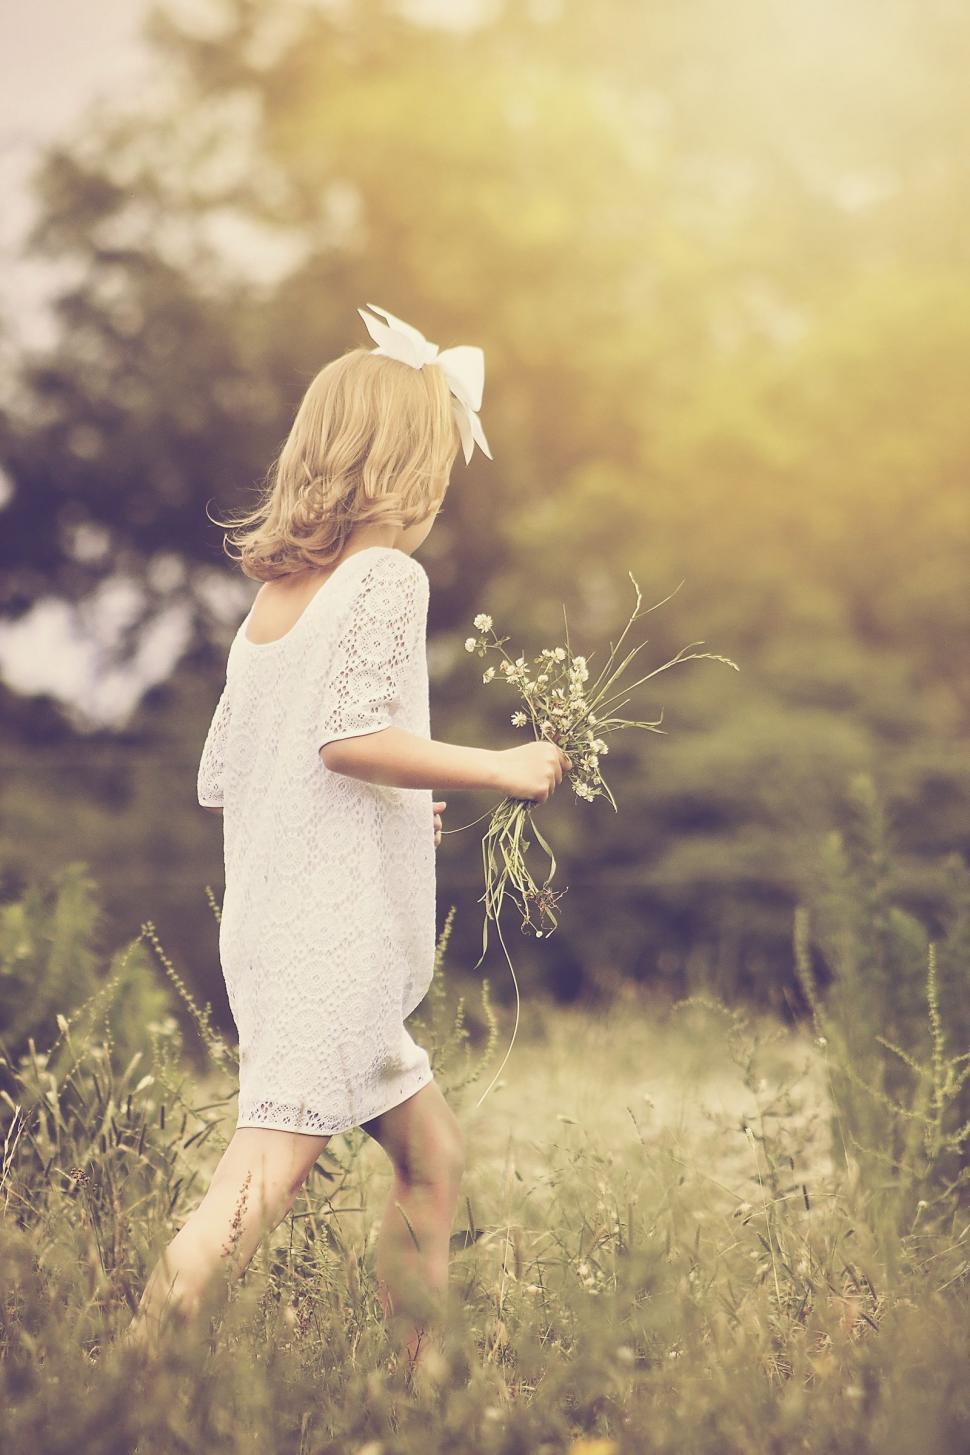 Free Image of Young Girl Walking With Flowers  